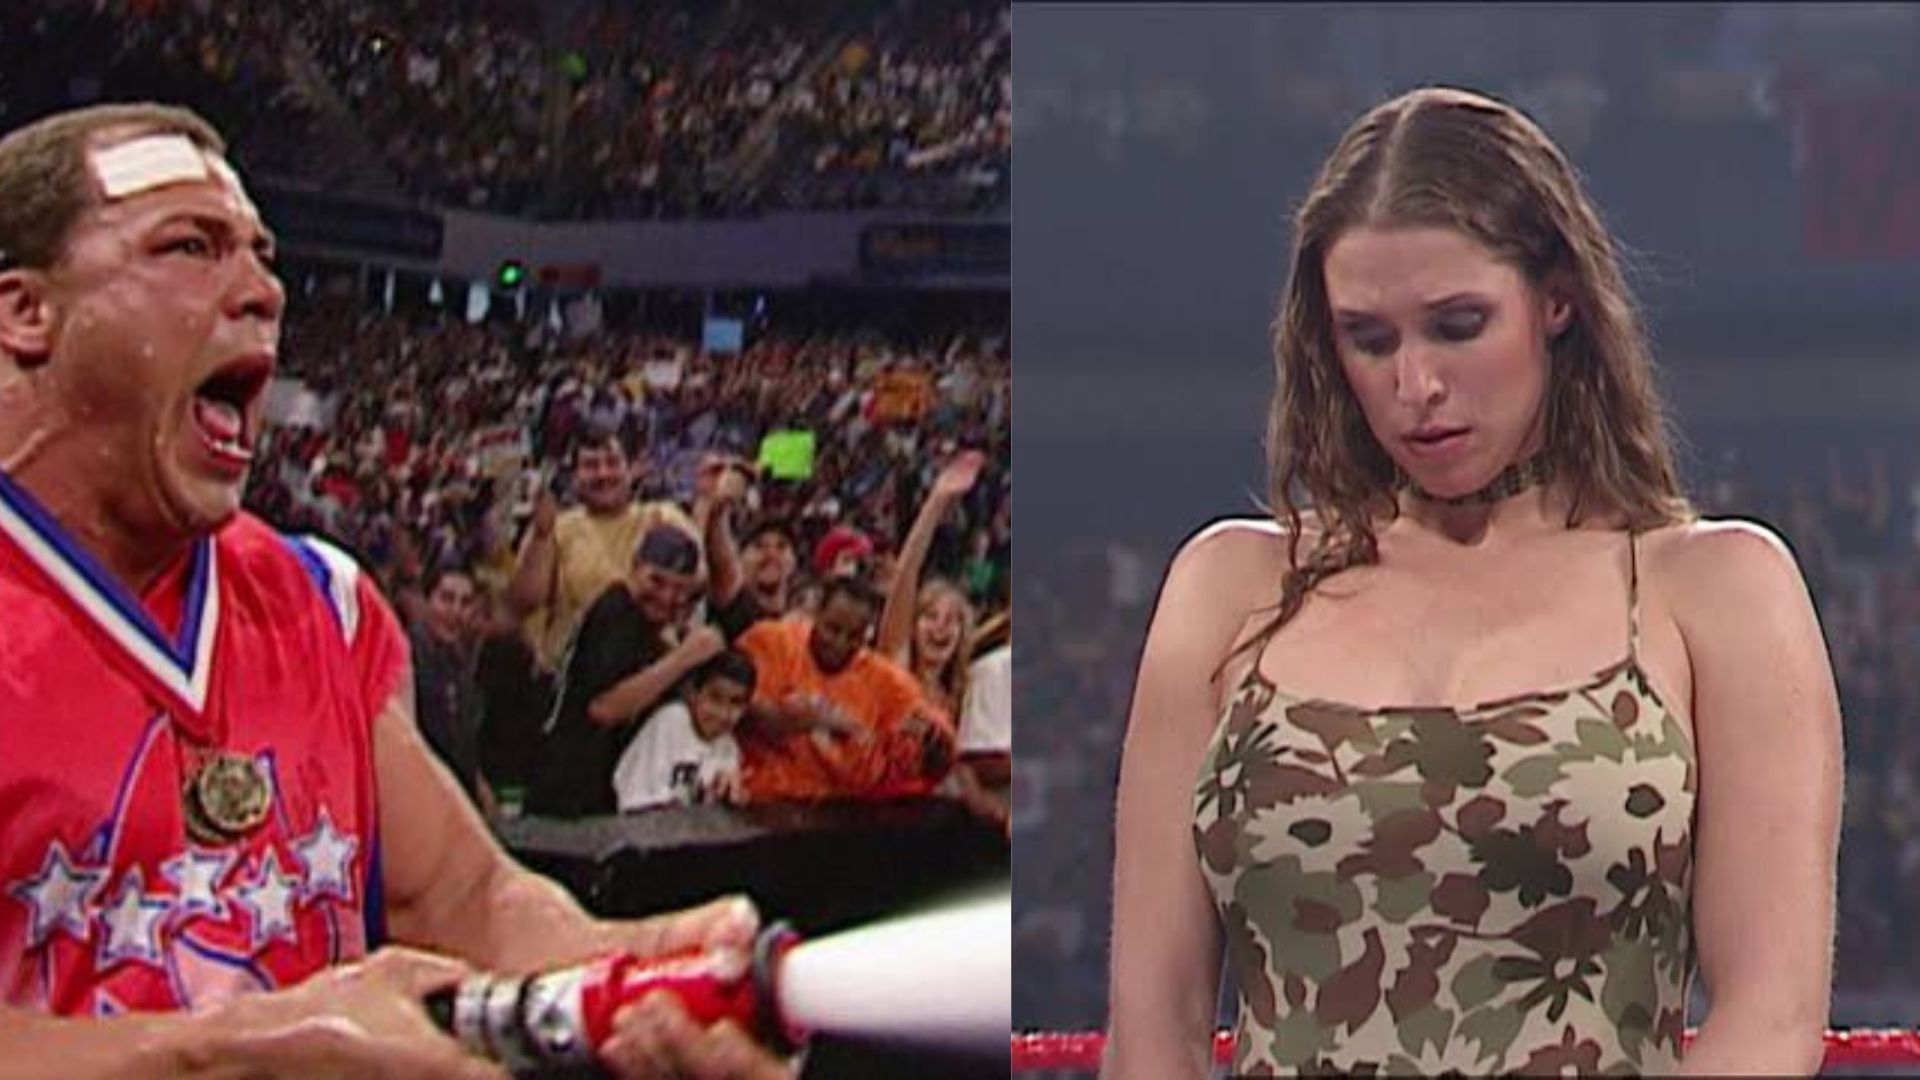 Stephanie McMahon is a former co-CEO of WWE